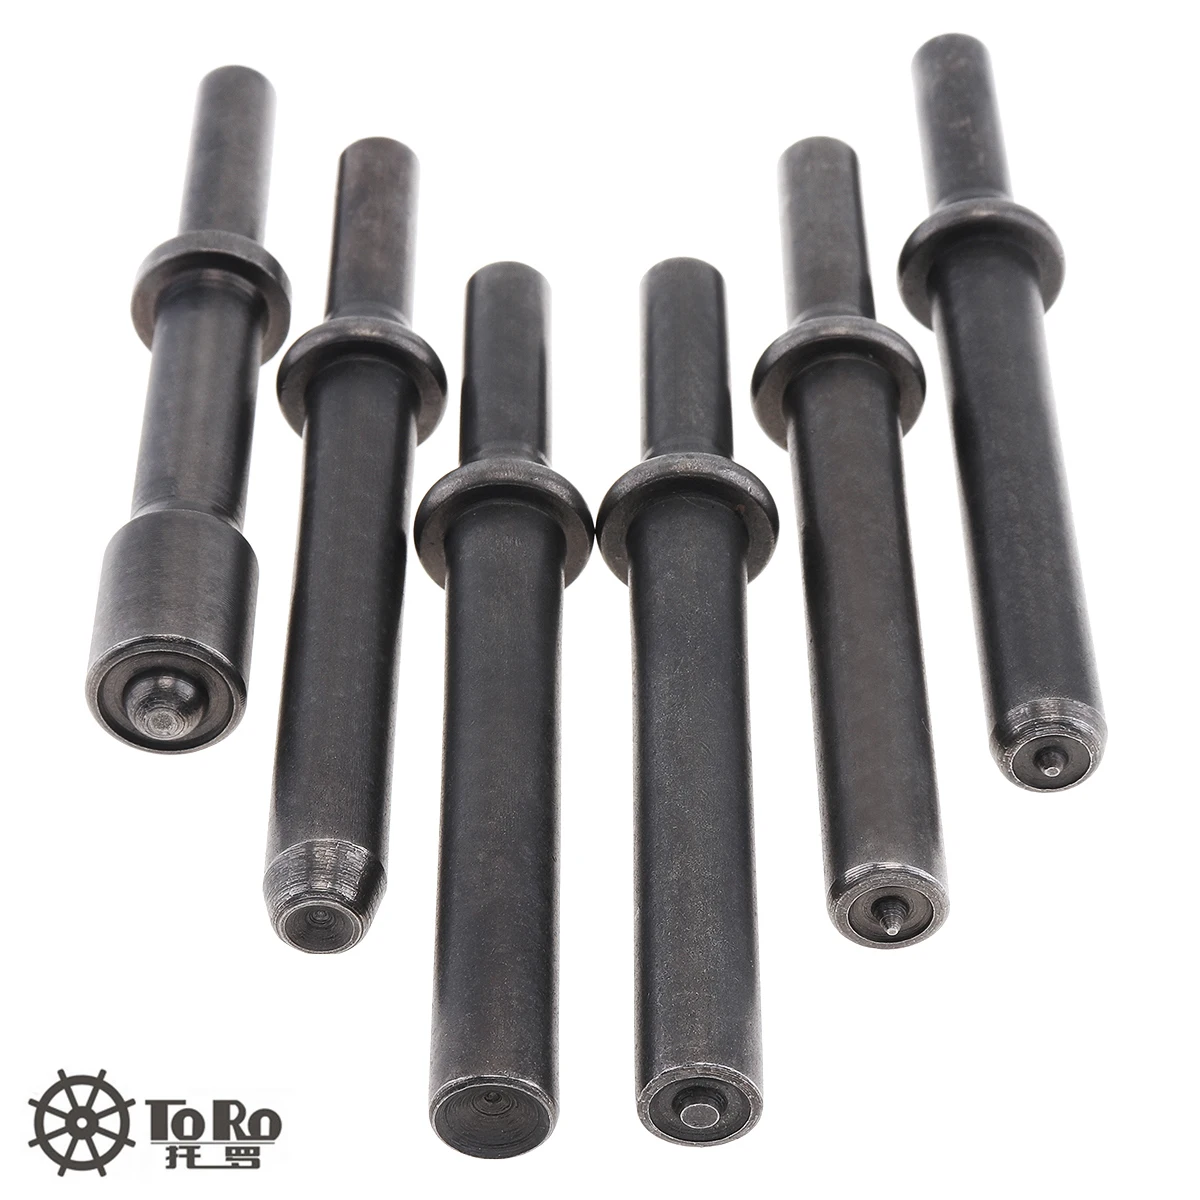 Pneumatic Tool Accessories Hard 45# Steel 6pcs/set  Solid Air Rivet Impact Head Support Pneumatic Tool for Drilling Removal stainless steel purification water purifier filter tap kitchen faucet attach filter cartridges rust bacteria removal percolator